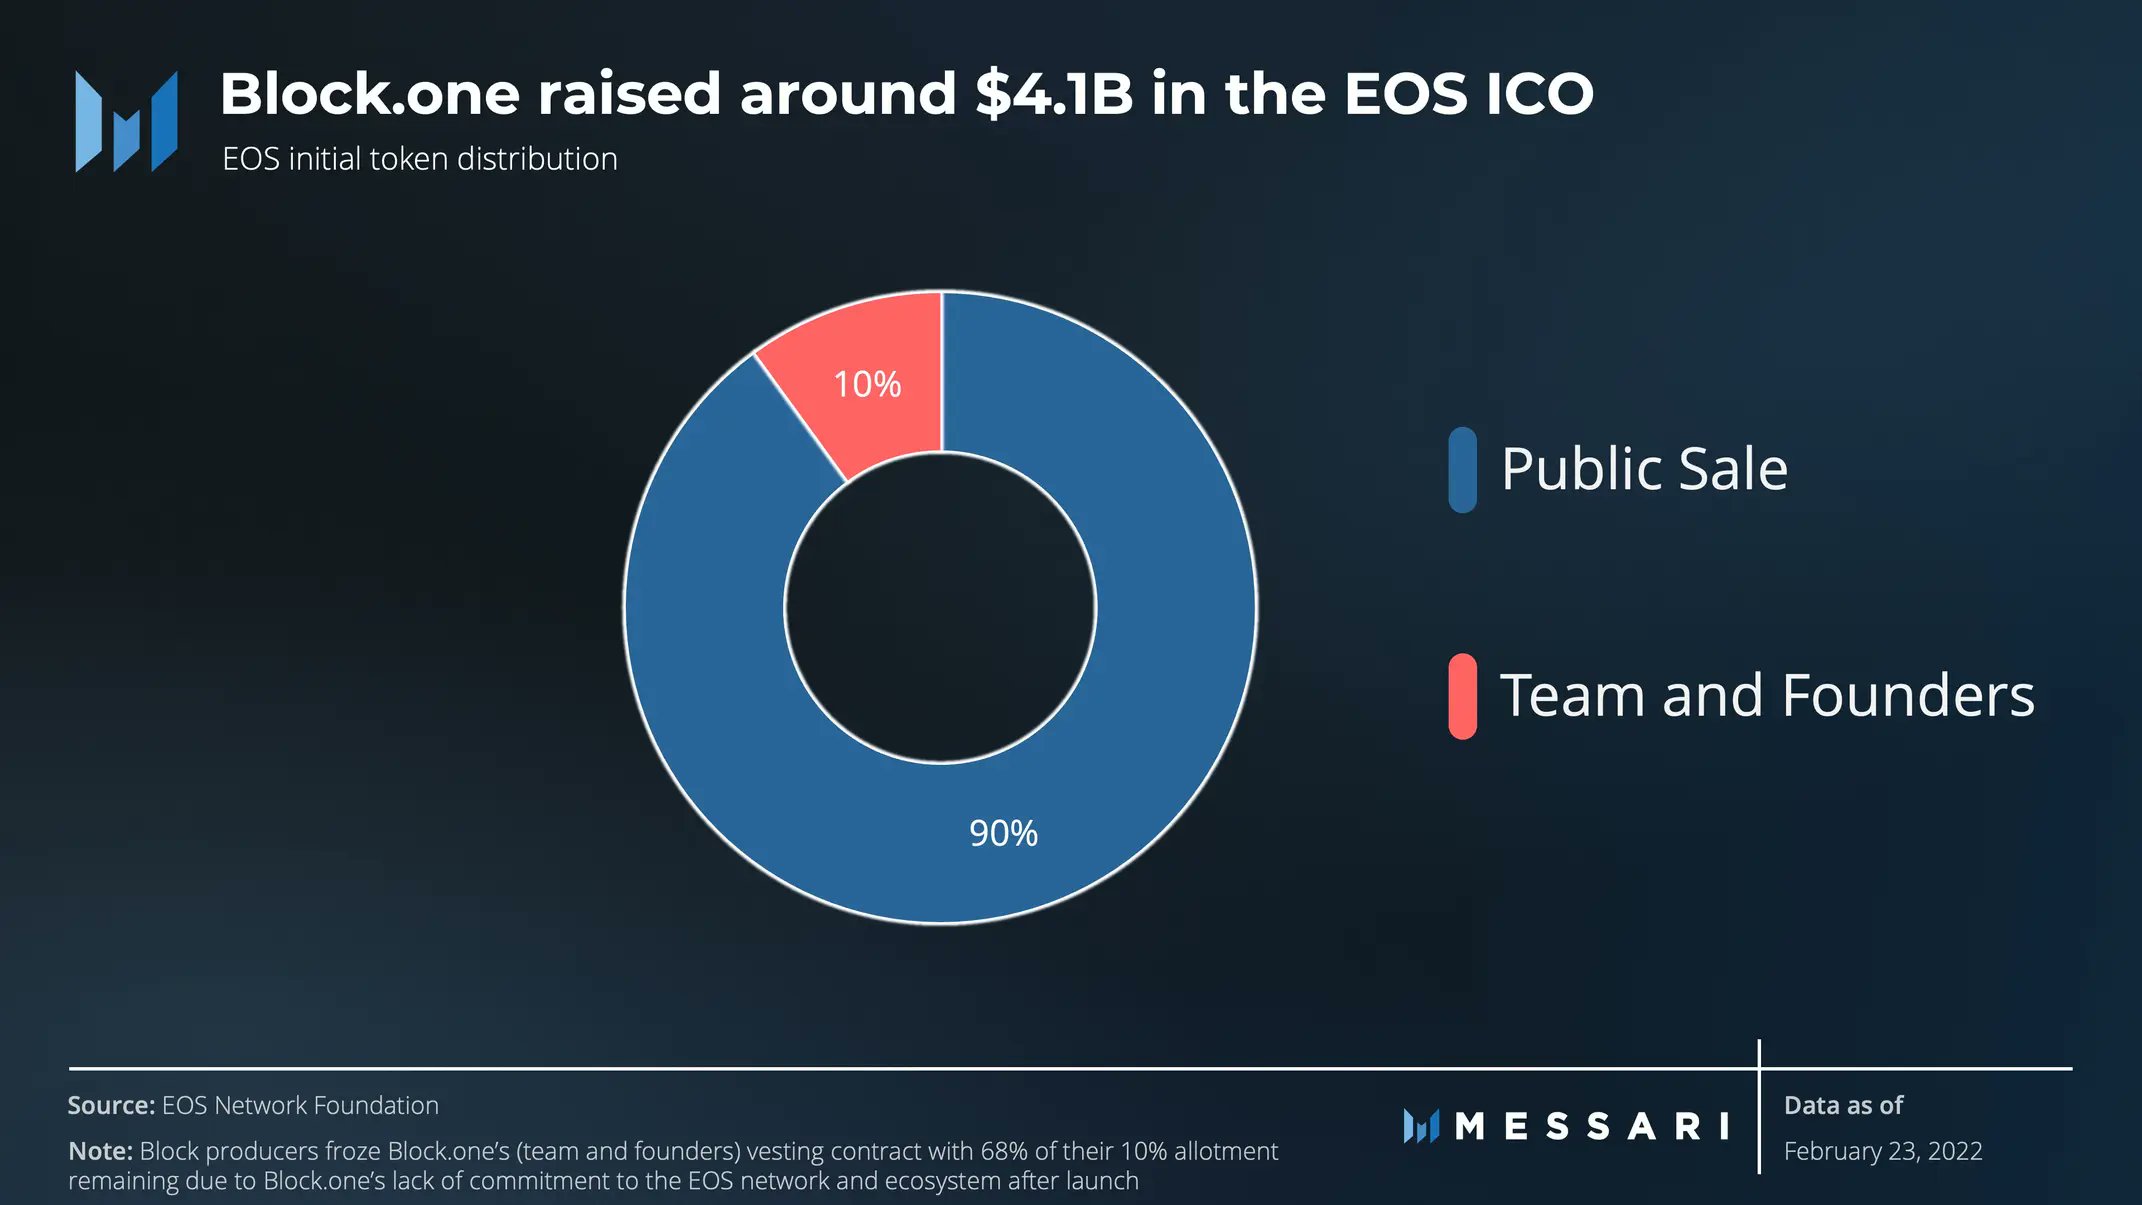 Messari on "7/ ~Tokenomics #EOS Network's native token $EOS is used for (validator and delegator staking) and resource allocation (CPU, NET, RAM fees). As it stands, EOS inflates at